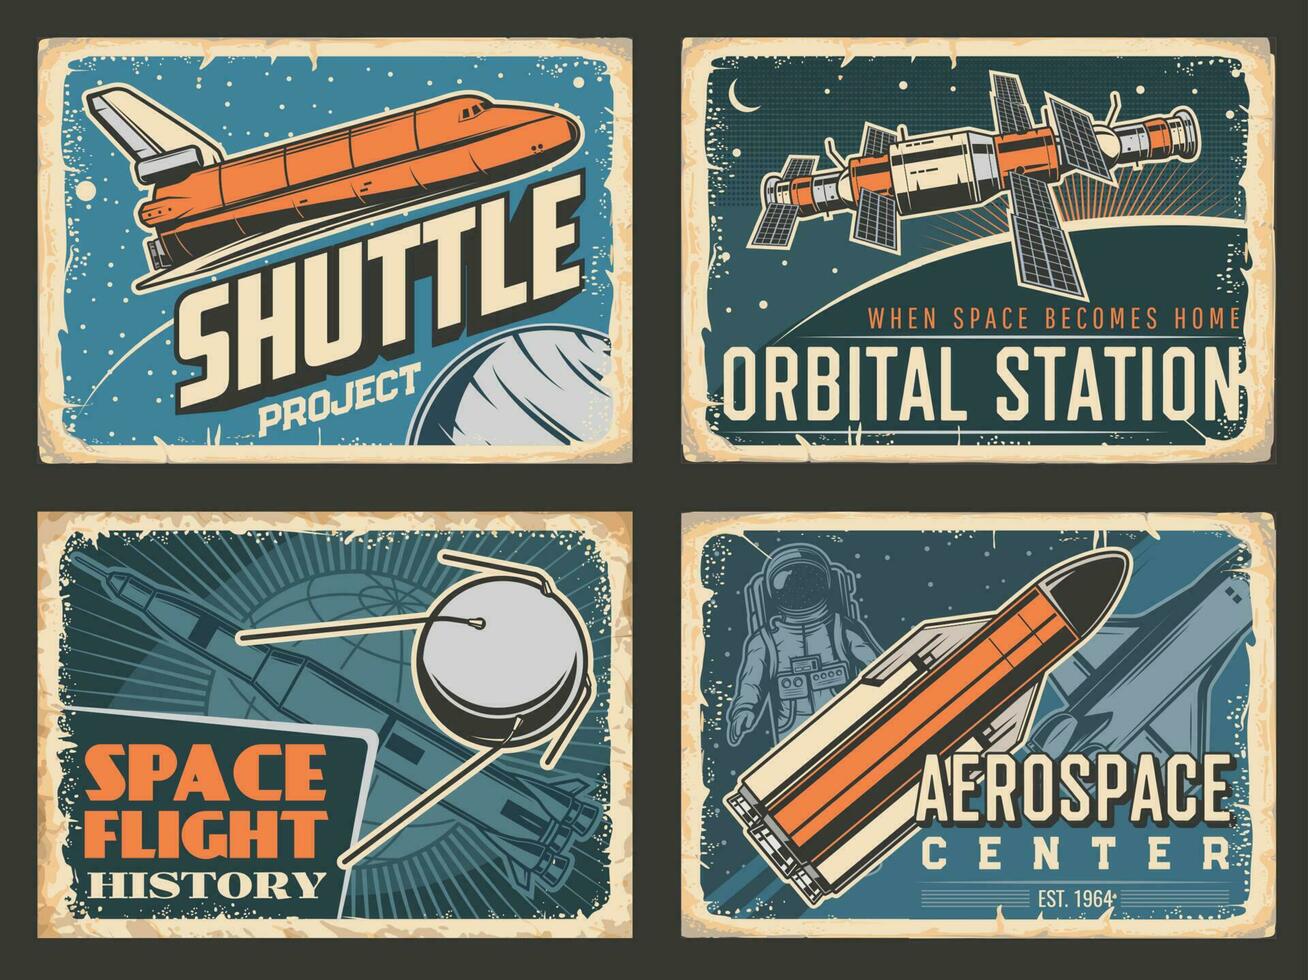 Space retro posters, orbital station and shuttle vector